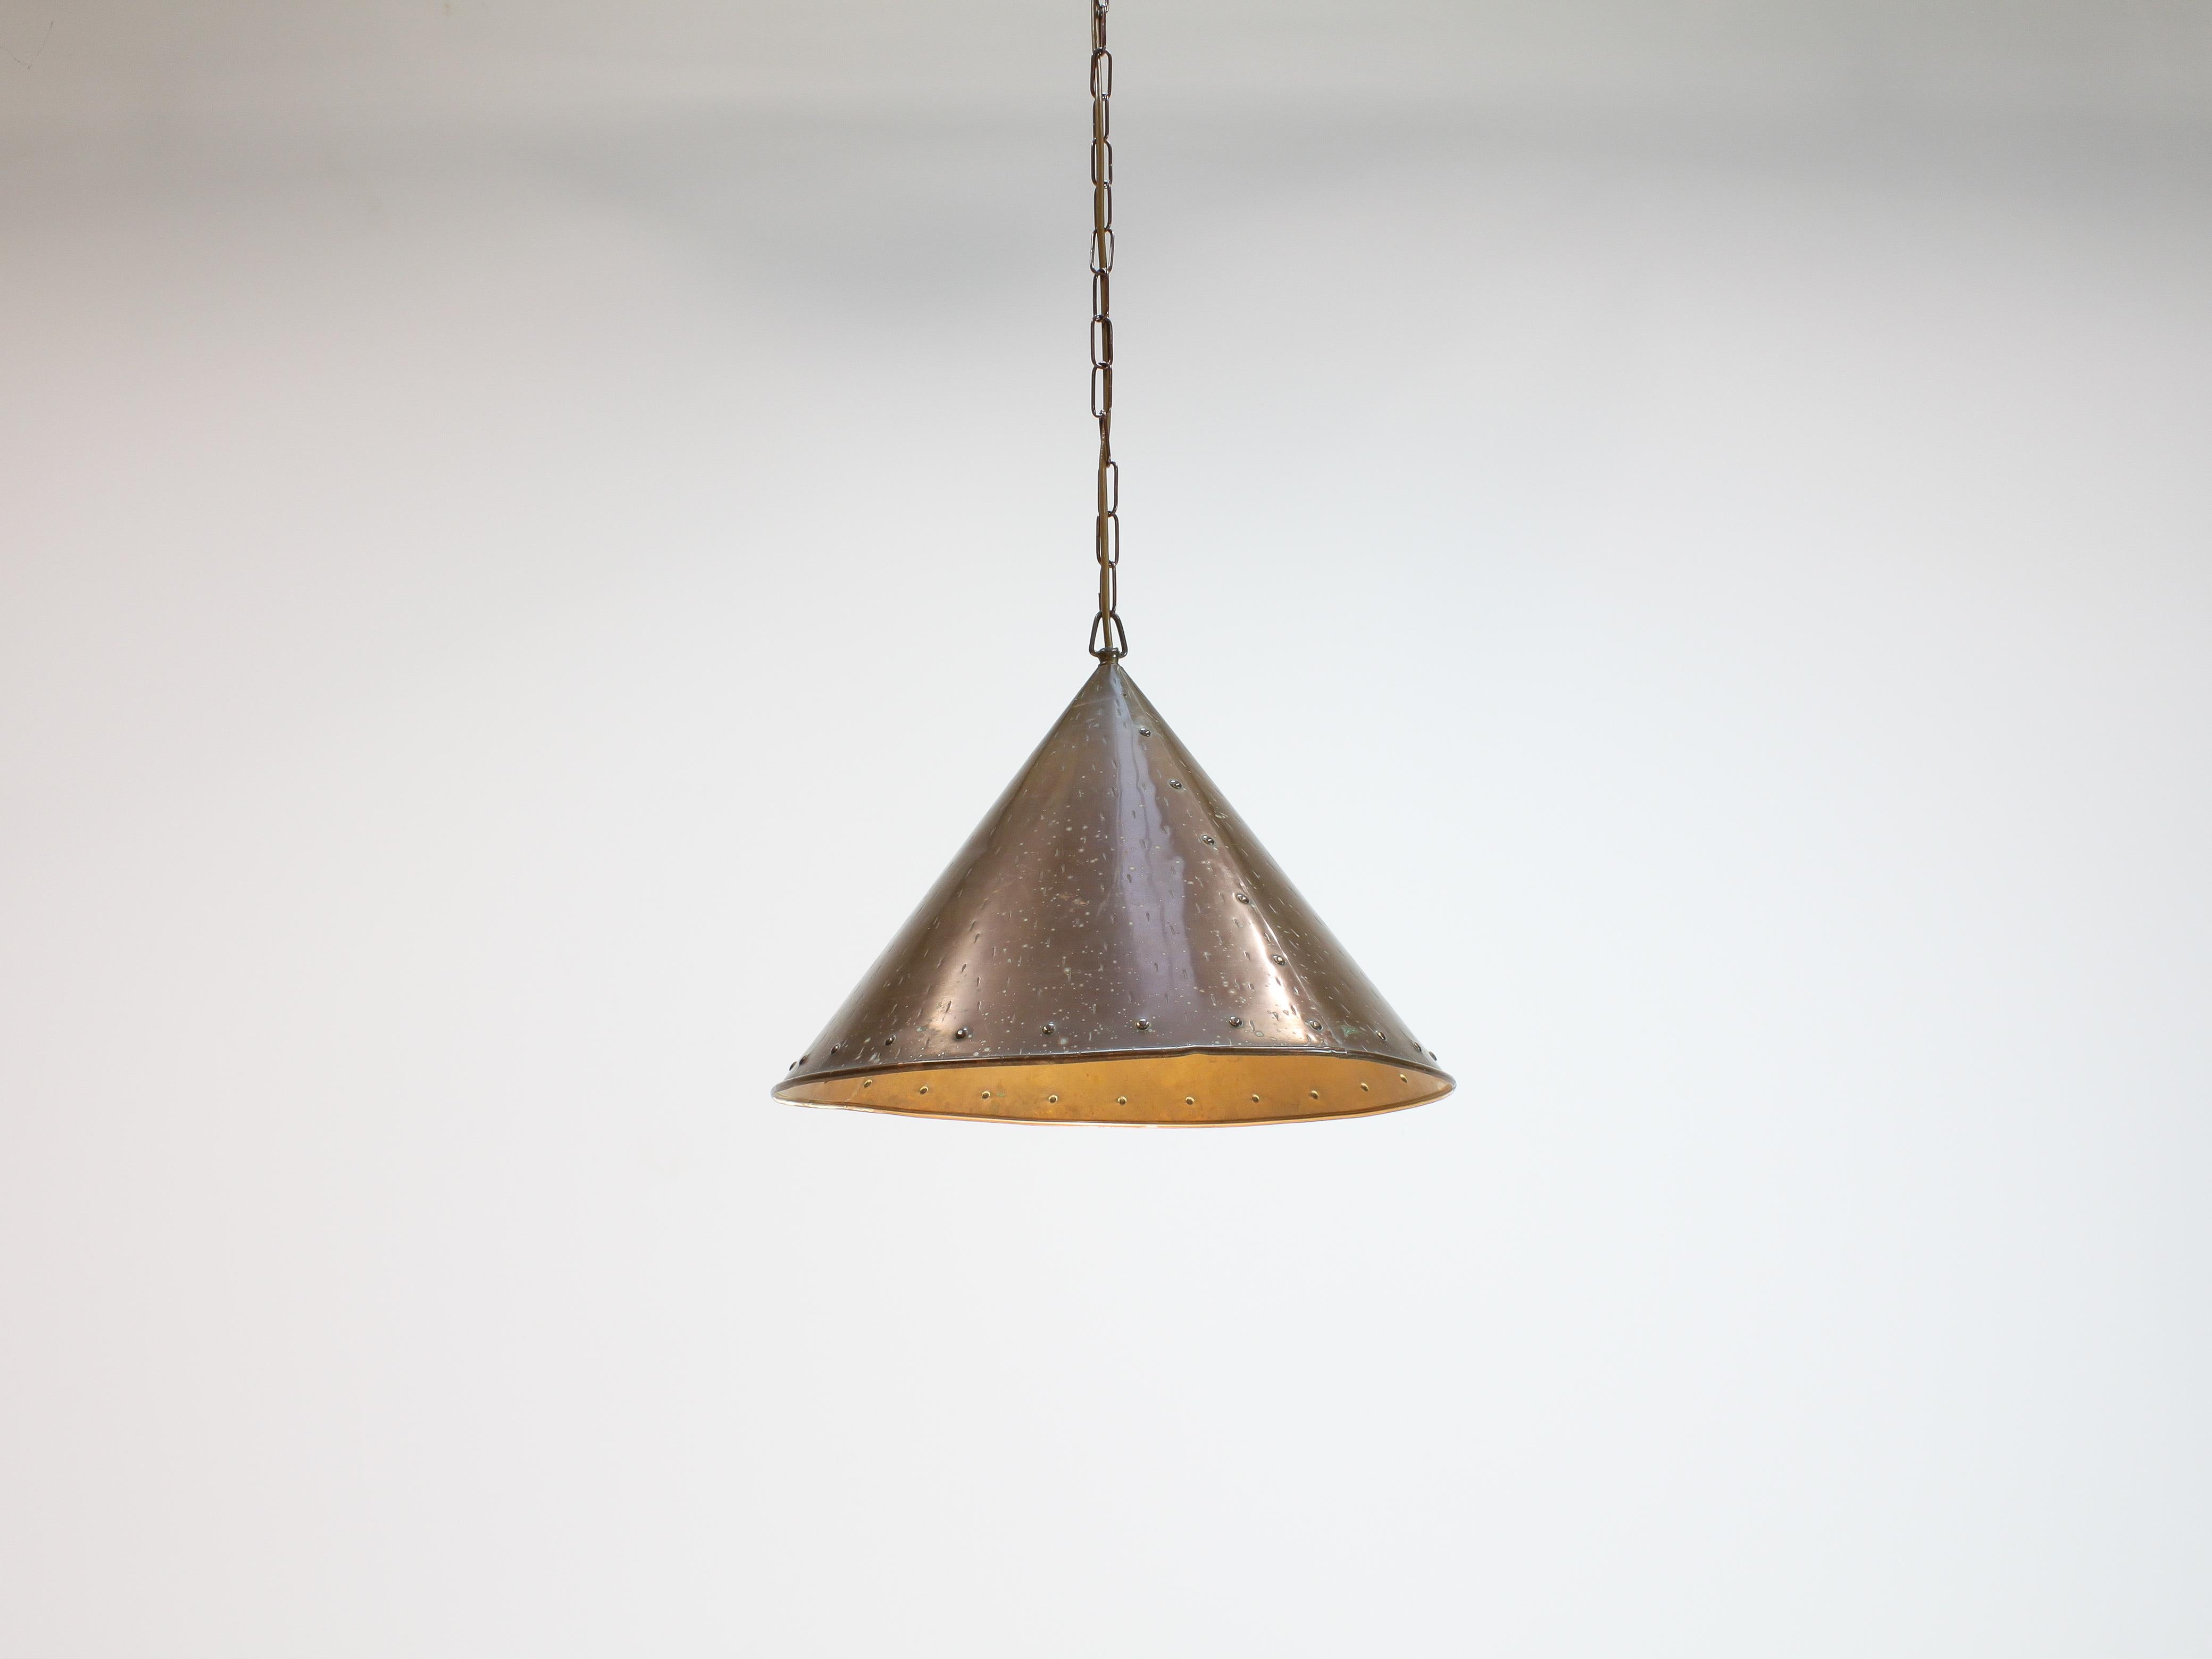 Scandinavian brutalist handcrafted Danish conical copper pendant lamp with the original hanging chain for Th. Valentiner, 1960s.

An impressive handcrafted conical pendant featuring a copper shade and hung using the original hanging